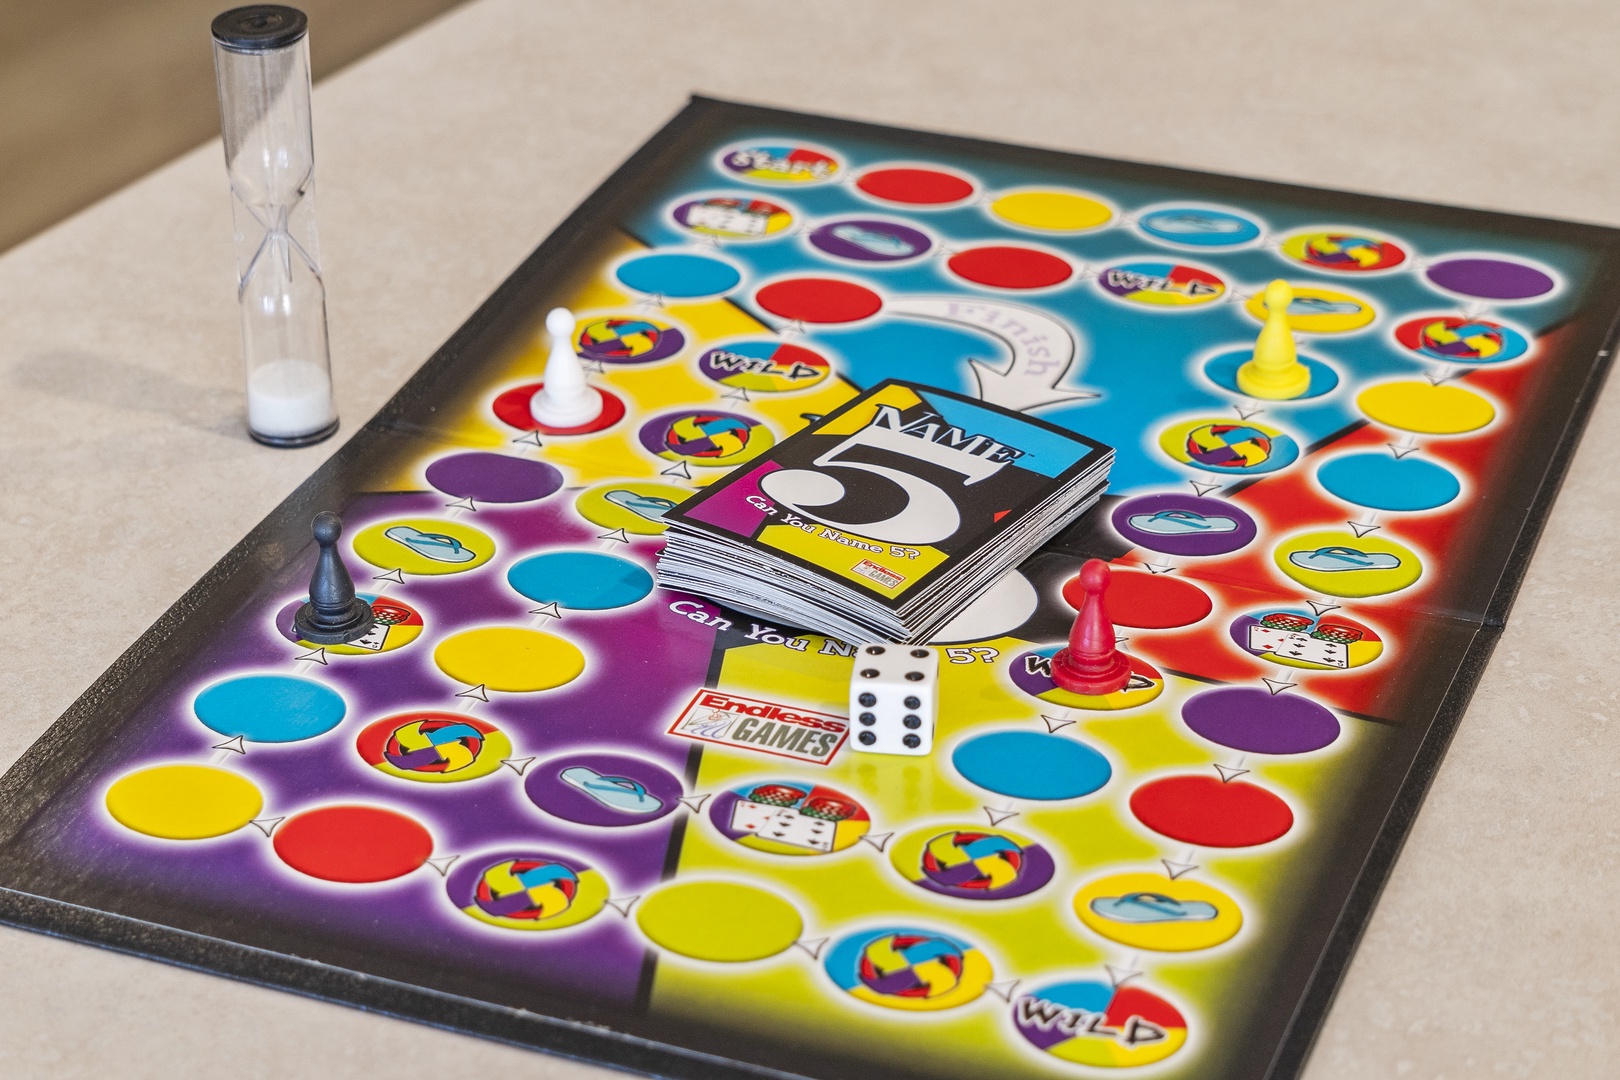 Break out the board games for hours of family fun! #GameOn